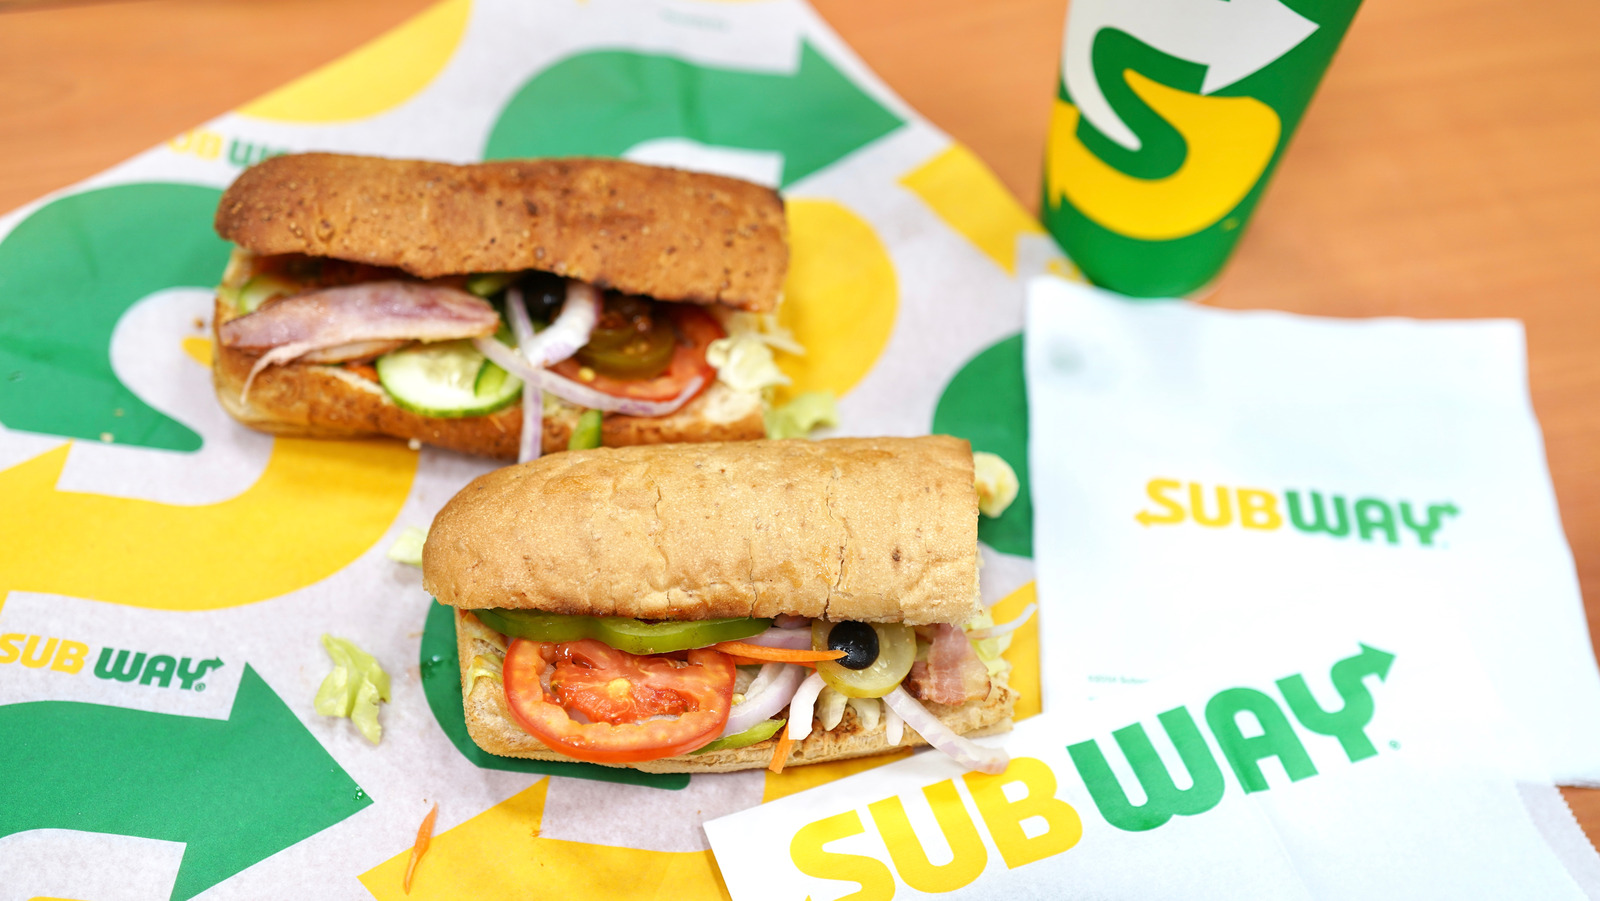 Trying Every Basic Sandwich at Subway, Which Are Worth It + Photos